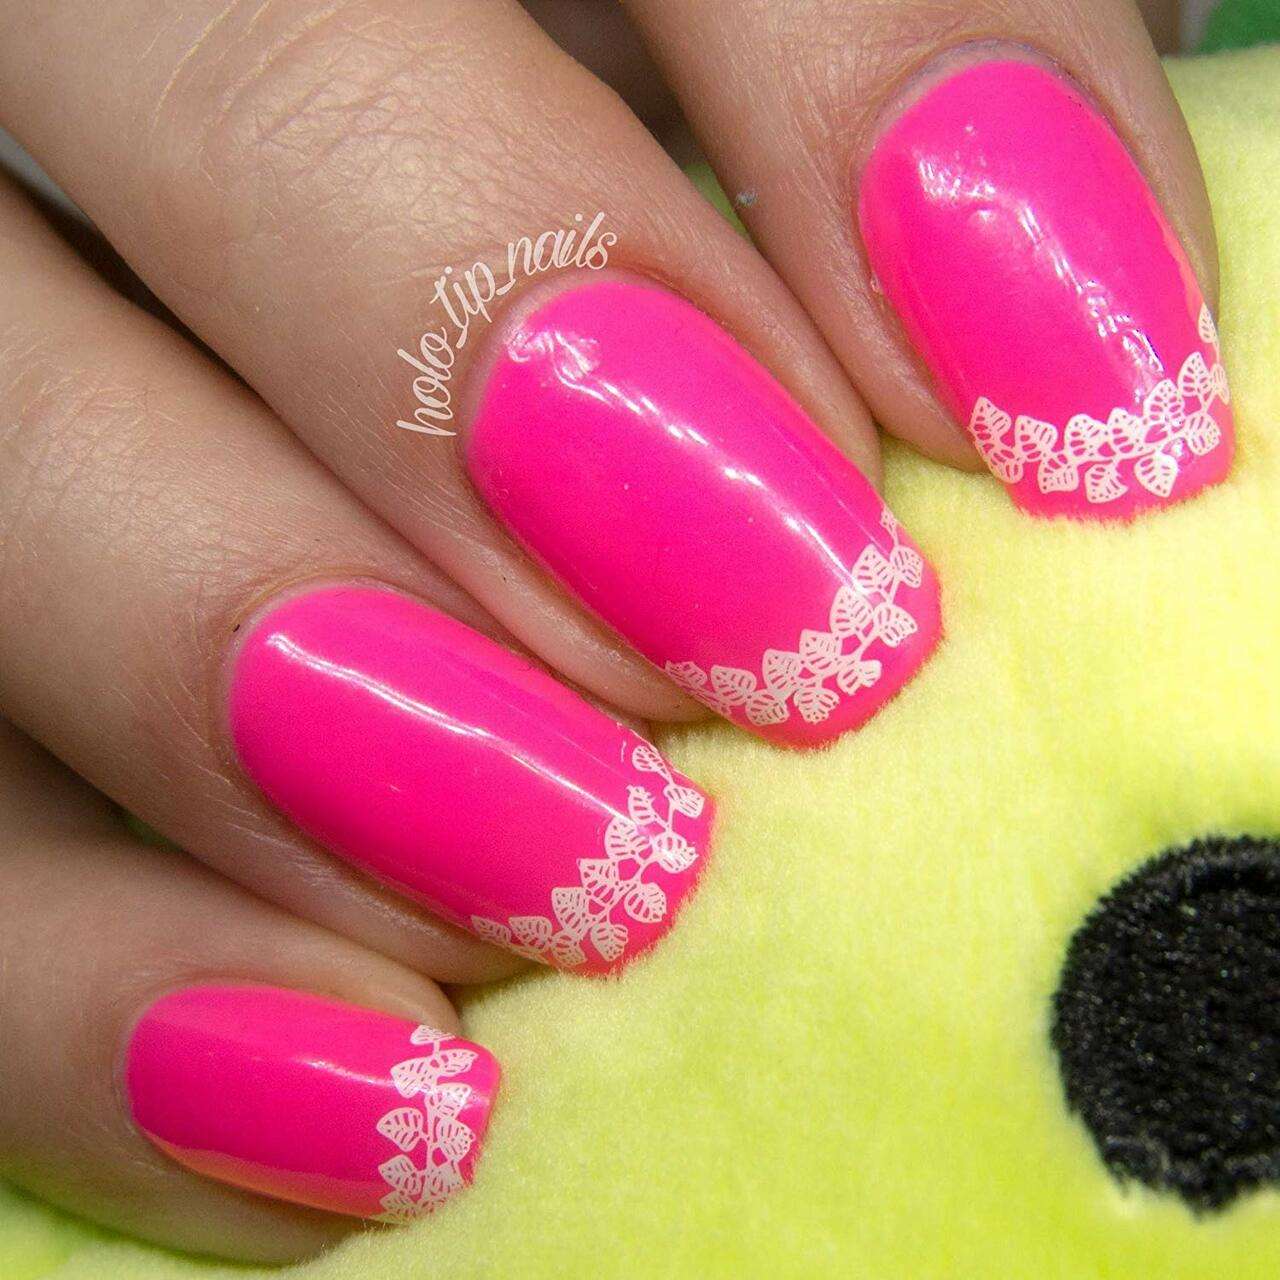 Bright Pink Cat, nail art designs by Top Nails, Clarksville TN.